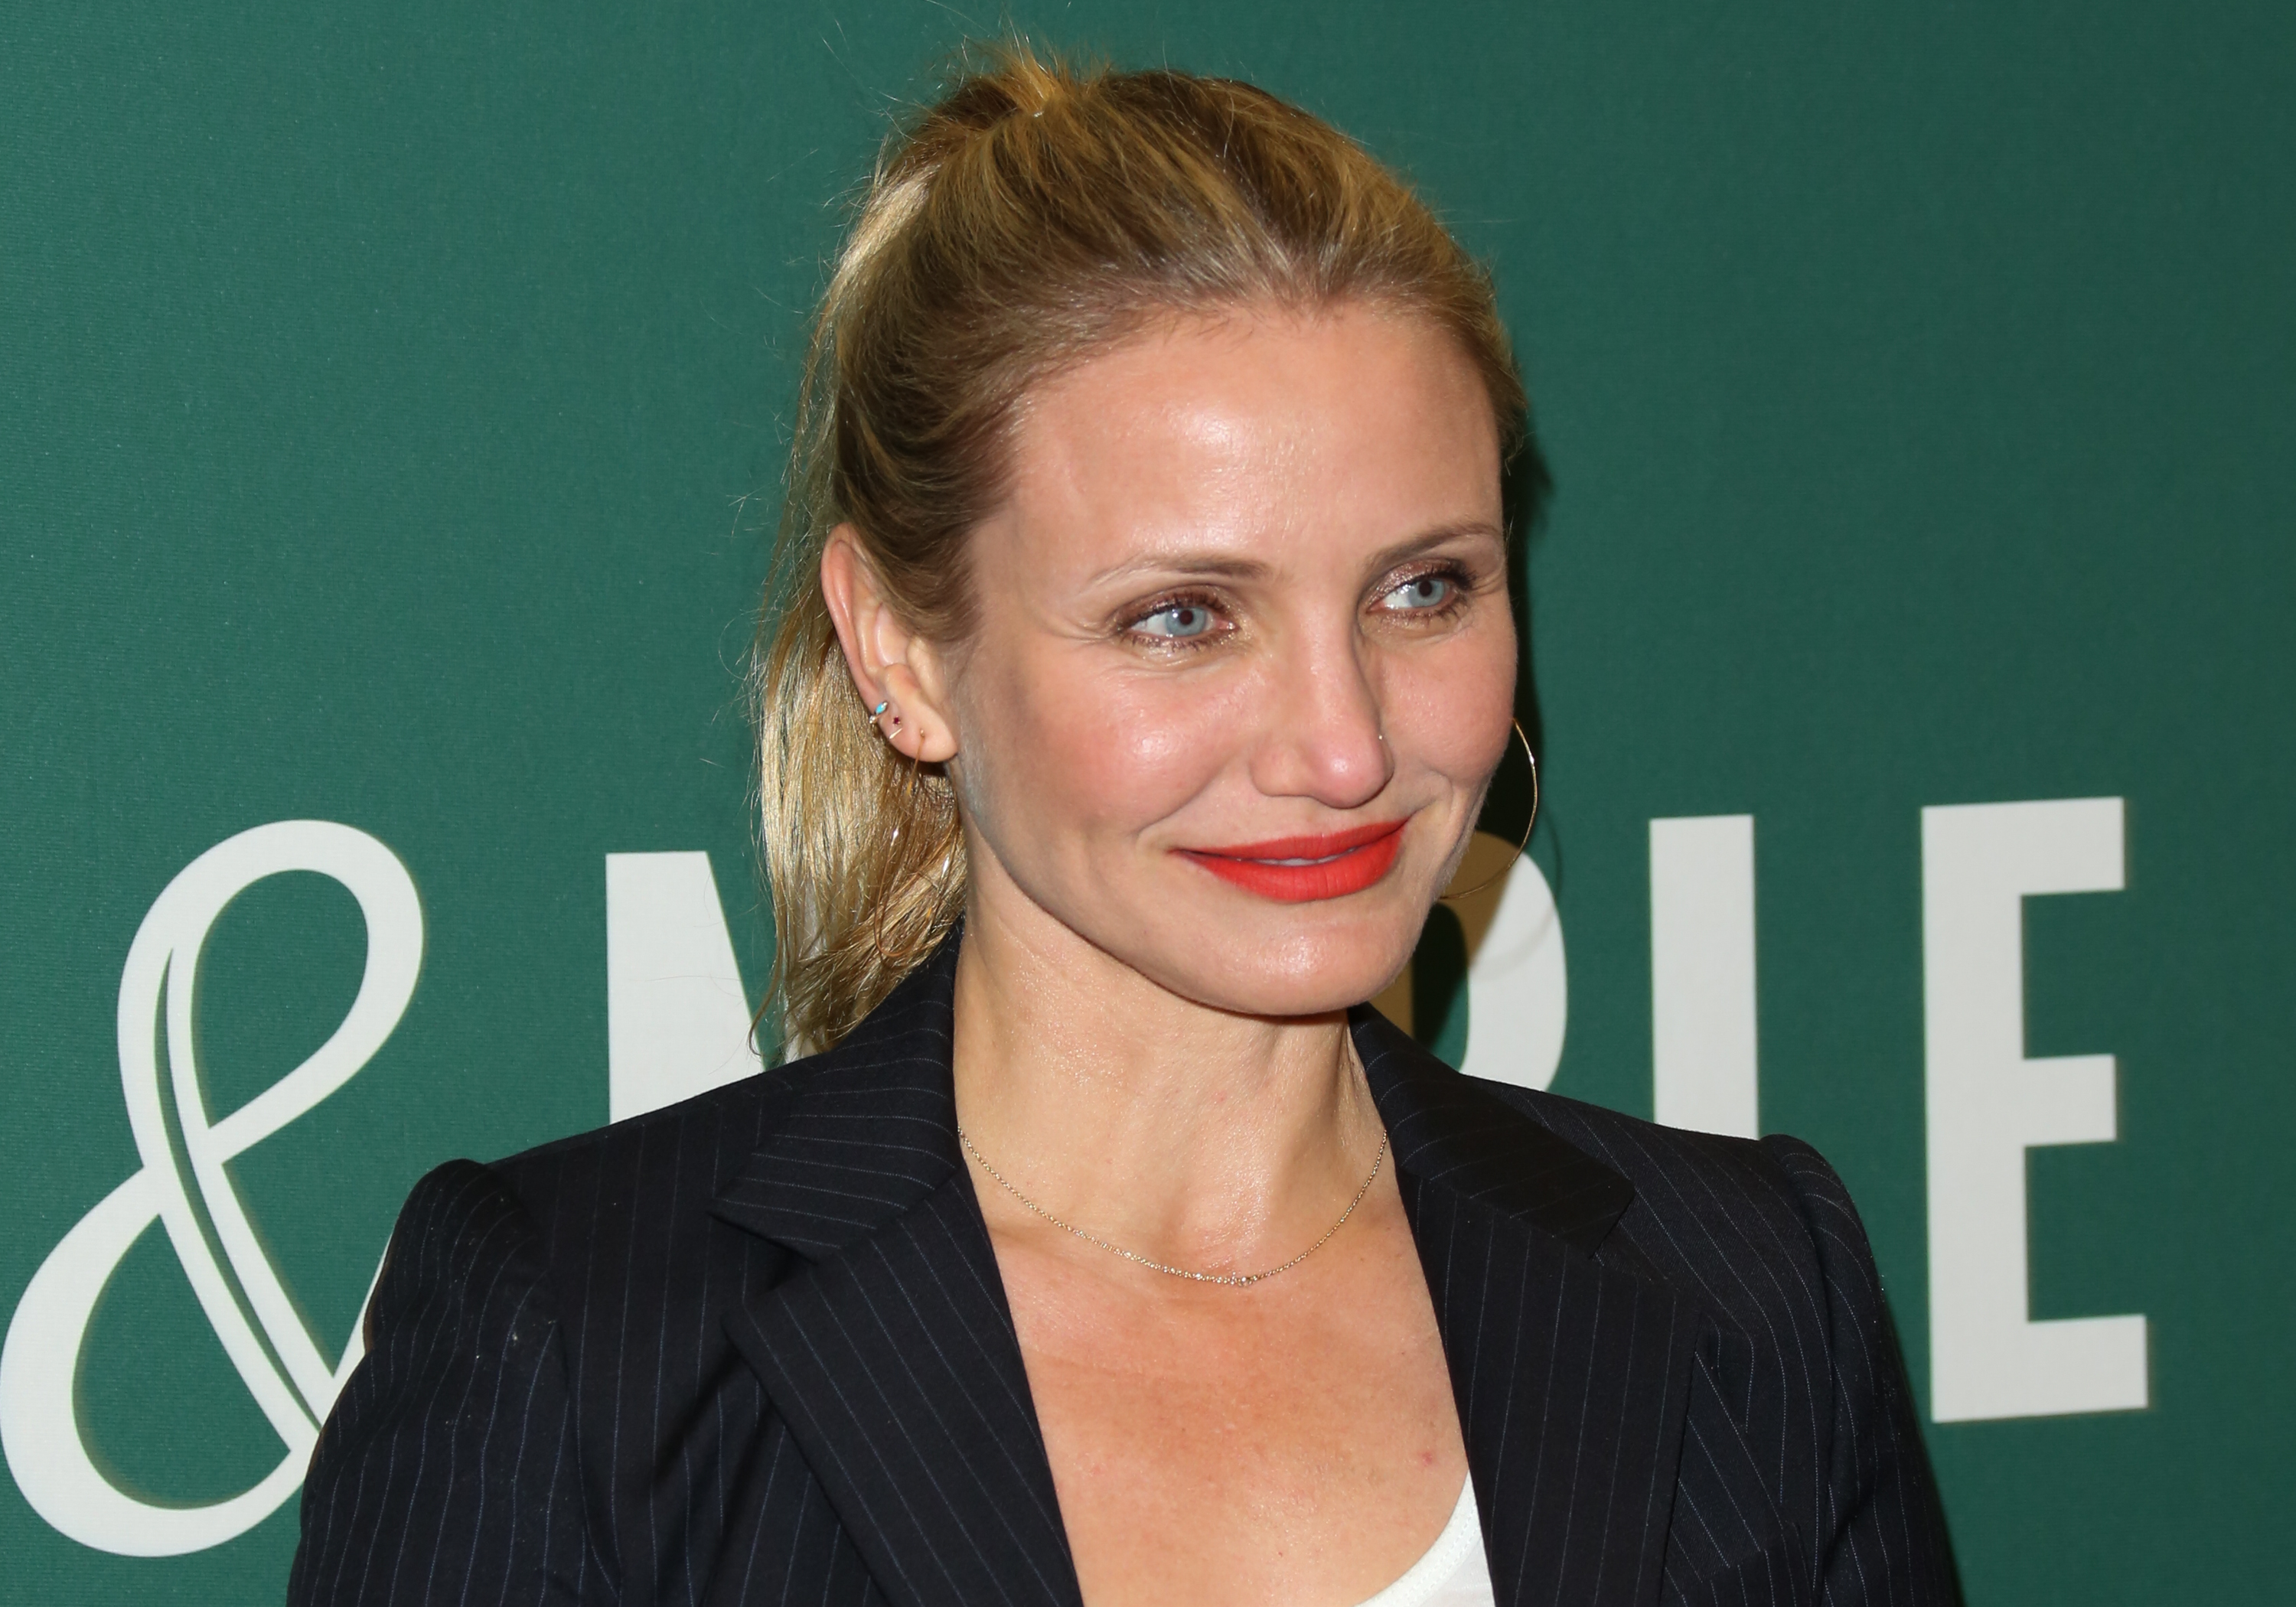 Cameron Diaz signs copies of her book "The Longevity Book" at Barnes & Noble at The Grove on April 13, 2016, in Los Angeles, California | Sources: Getty Images